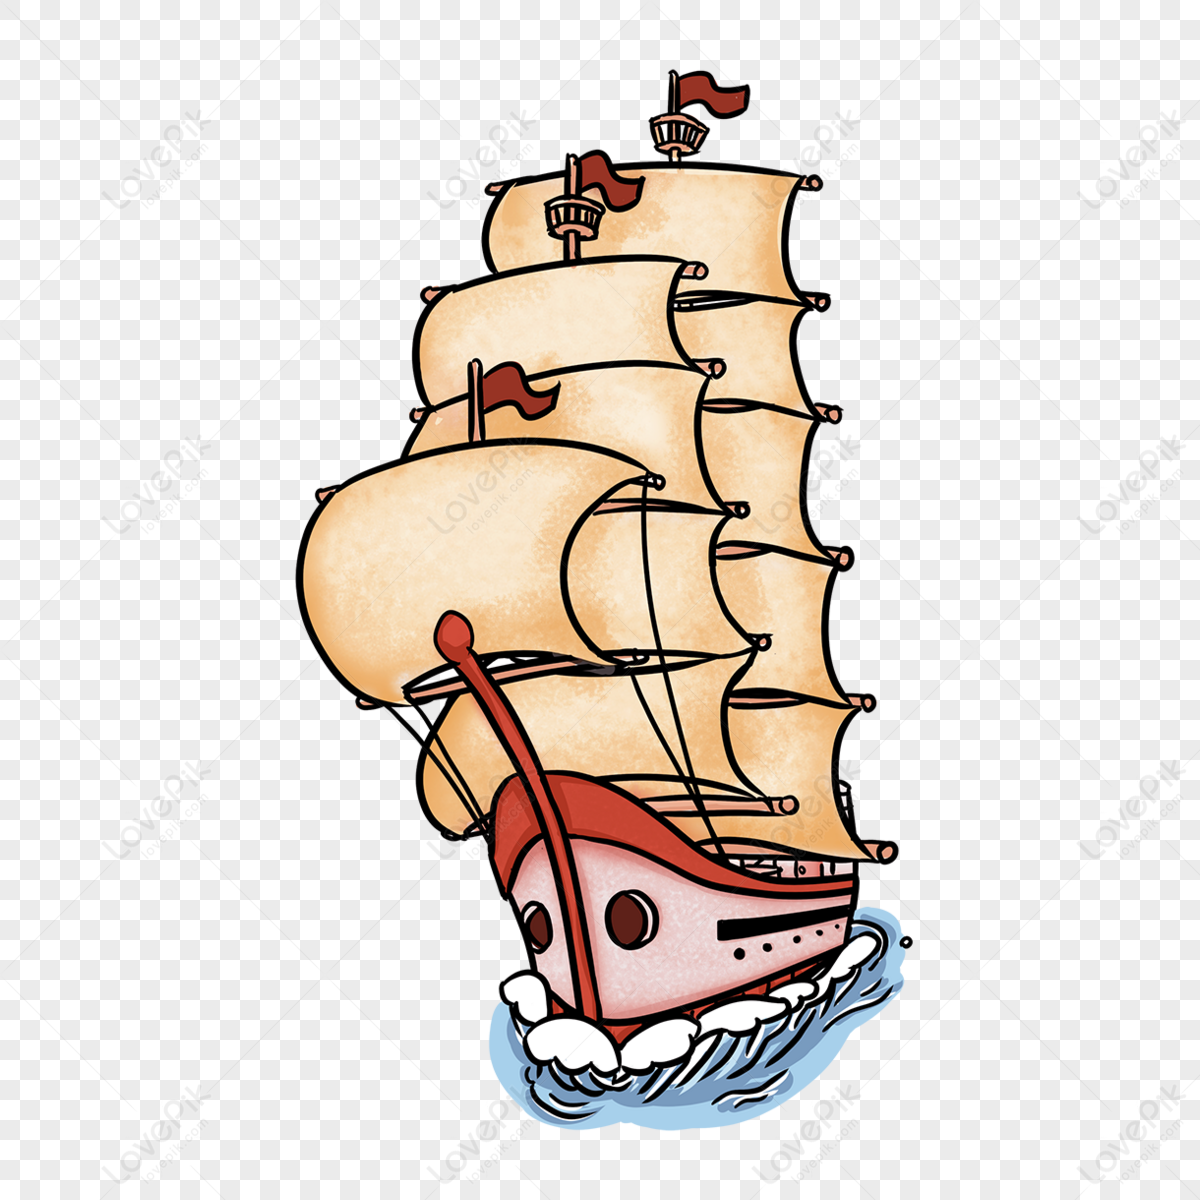 Cartoon style clipart orange sailboat,ferry,spray png image